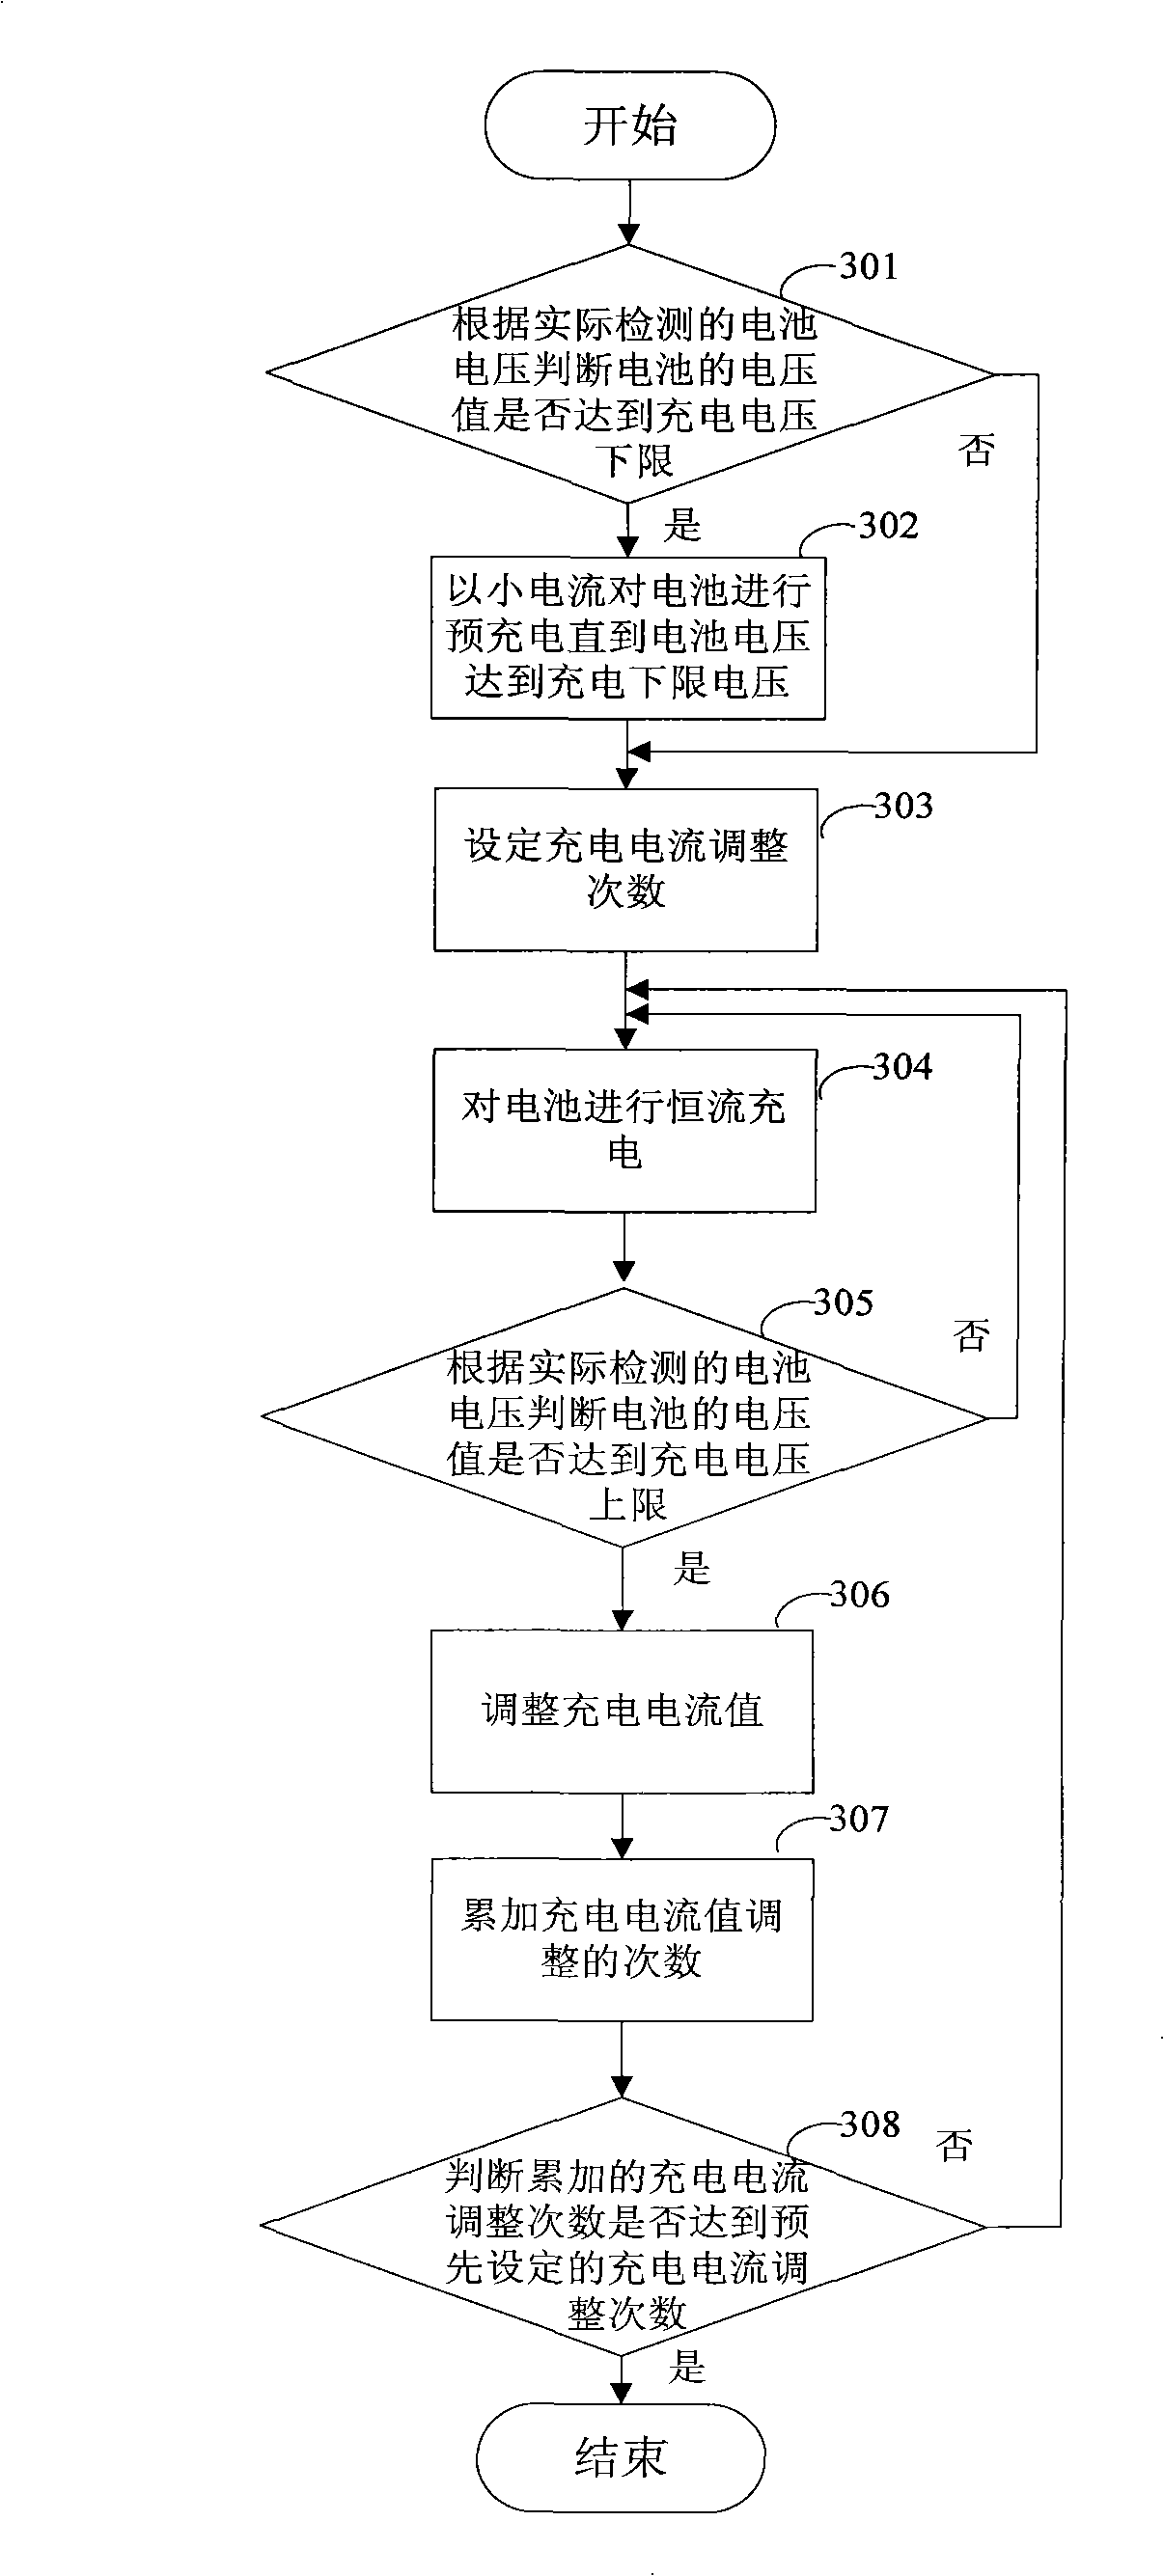 Method and apparatus for charging battery